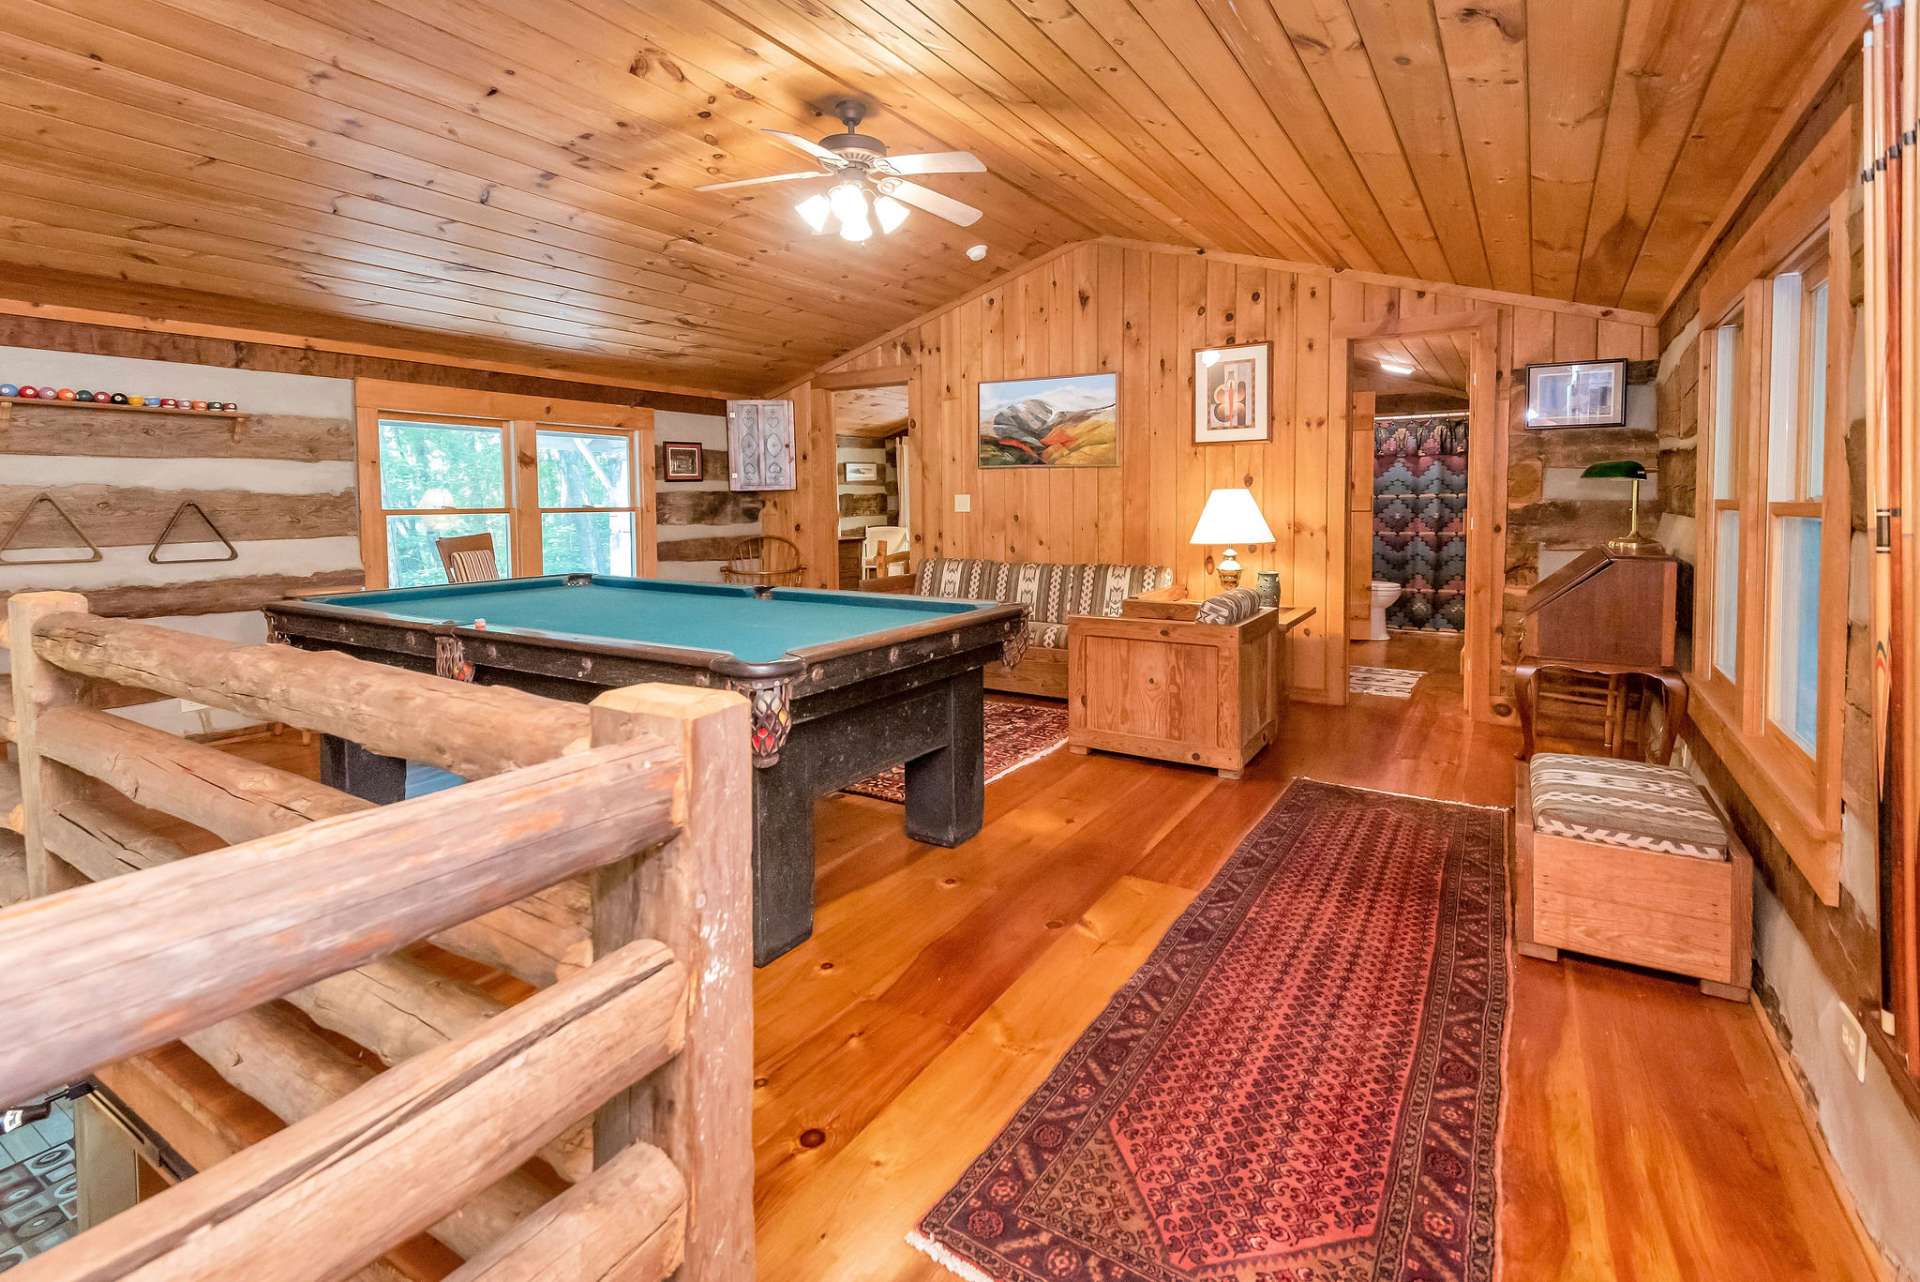 For perspective, this generous loft currently has a full size pool table and various sitting areas and a desk. It's a big one!